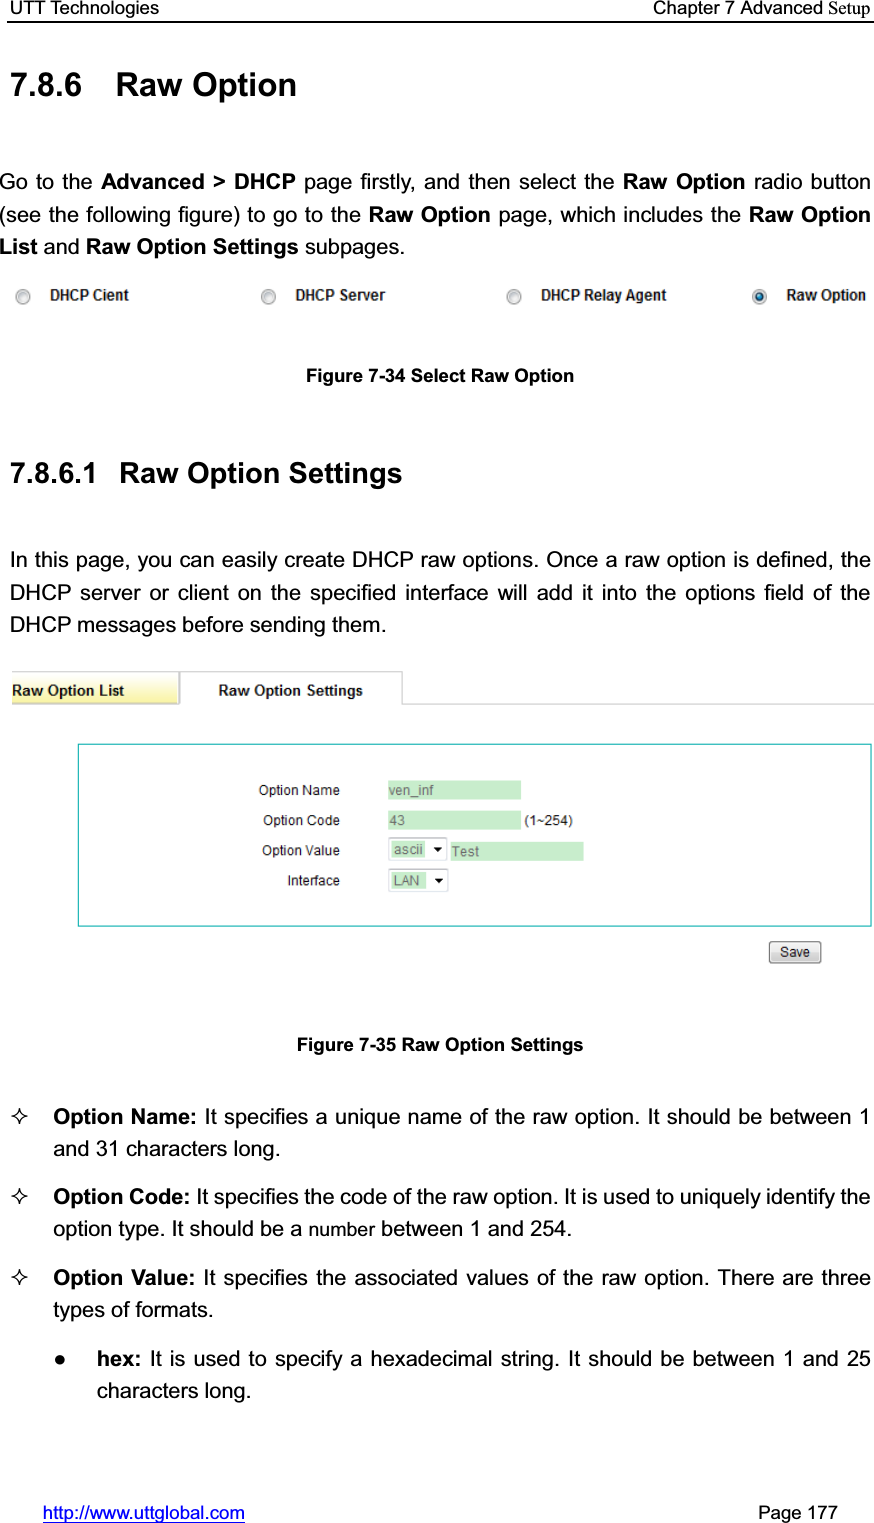 UTT Technologies    Chapter 7 Advanced Setuphttp://www.uttglobal.com                                                       Page 177 7.8.6 Raw Option Go to the Advanced &gt; DHCP page firstly, and then select the Raw Option radio button (see the following figure) to go to the Raw Option page, which includes the Raw Option List and Raw Option Settings subpages. Figure 7-34 Select Raw Option 7.8.6.1  Raw Option Settings In this page, you can easily create DHCP raw options. Once a raw option is defined, the DHCP server or client on the specified interface will add it into the options field of the DHCP messages before sending them. Figure 7-35 Raw Option Settings Option Name: It specifies a unique name of the raw option. It should be between 1 and 31 characters long. Option Code: It specifies the code of the raw option. It is used to uniquely identify the option type. It should be a number between 1 and 254. Option Value: It specifies the associated values of the raw option. There are three types of formats. Ɣhex: It is used to specify a hexadecimal string. It should be between 1 and 25 characters long.